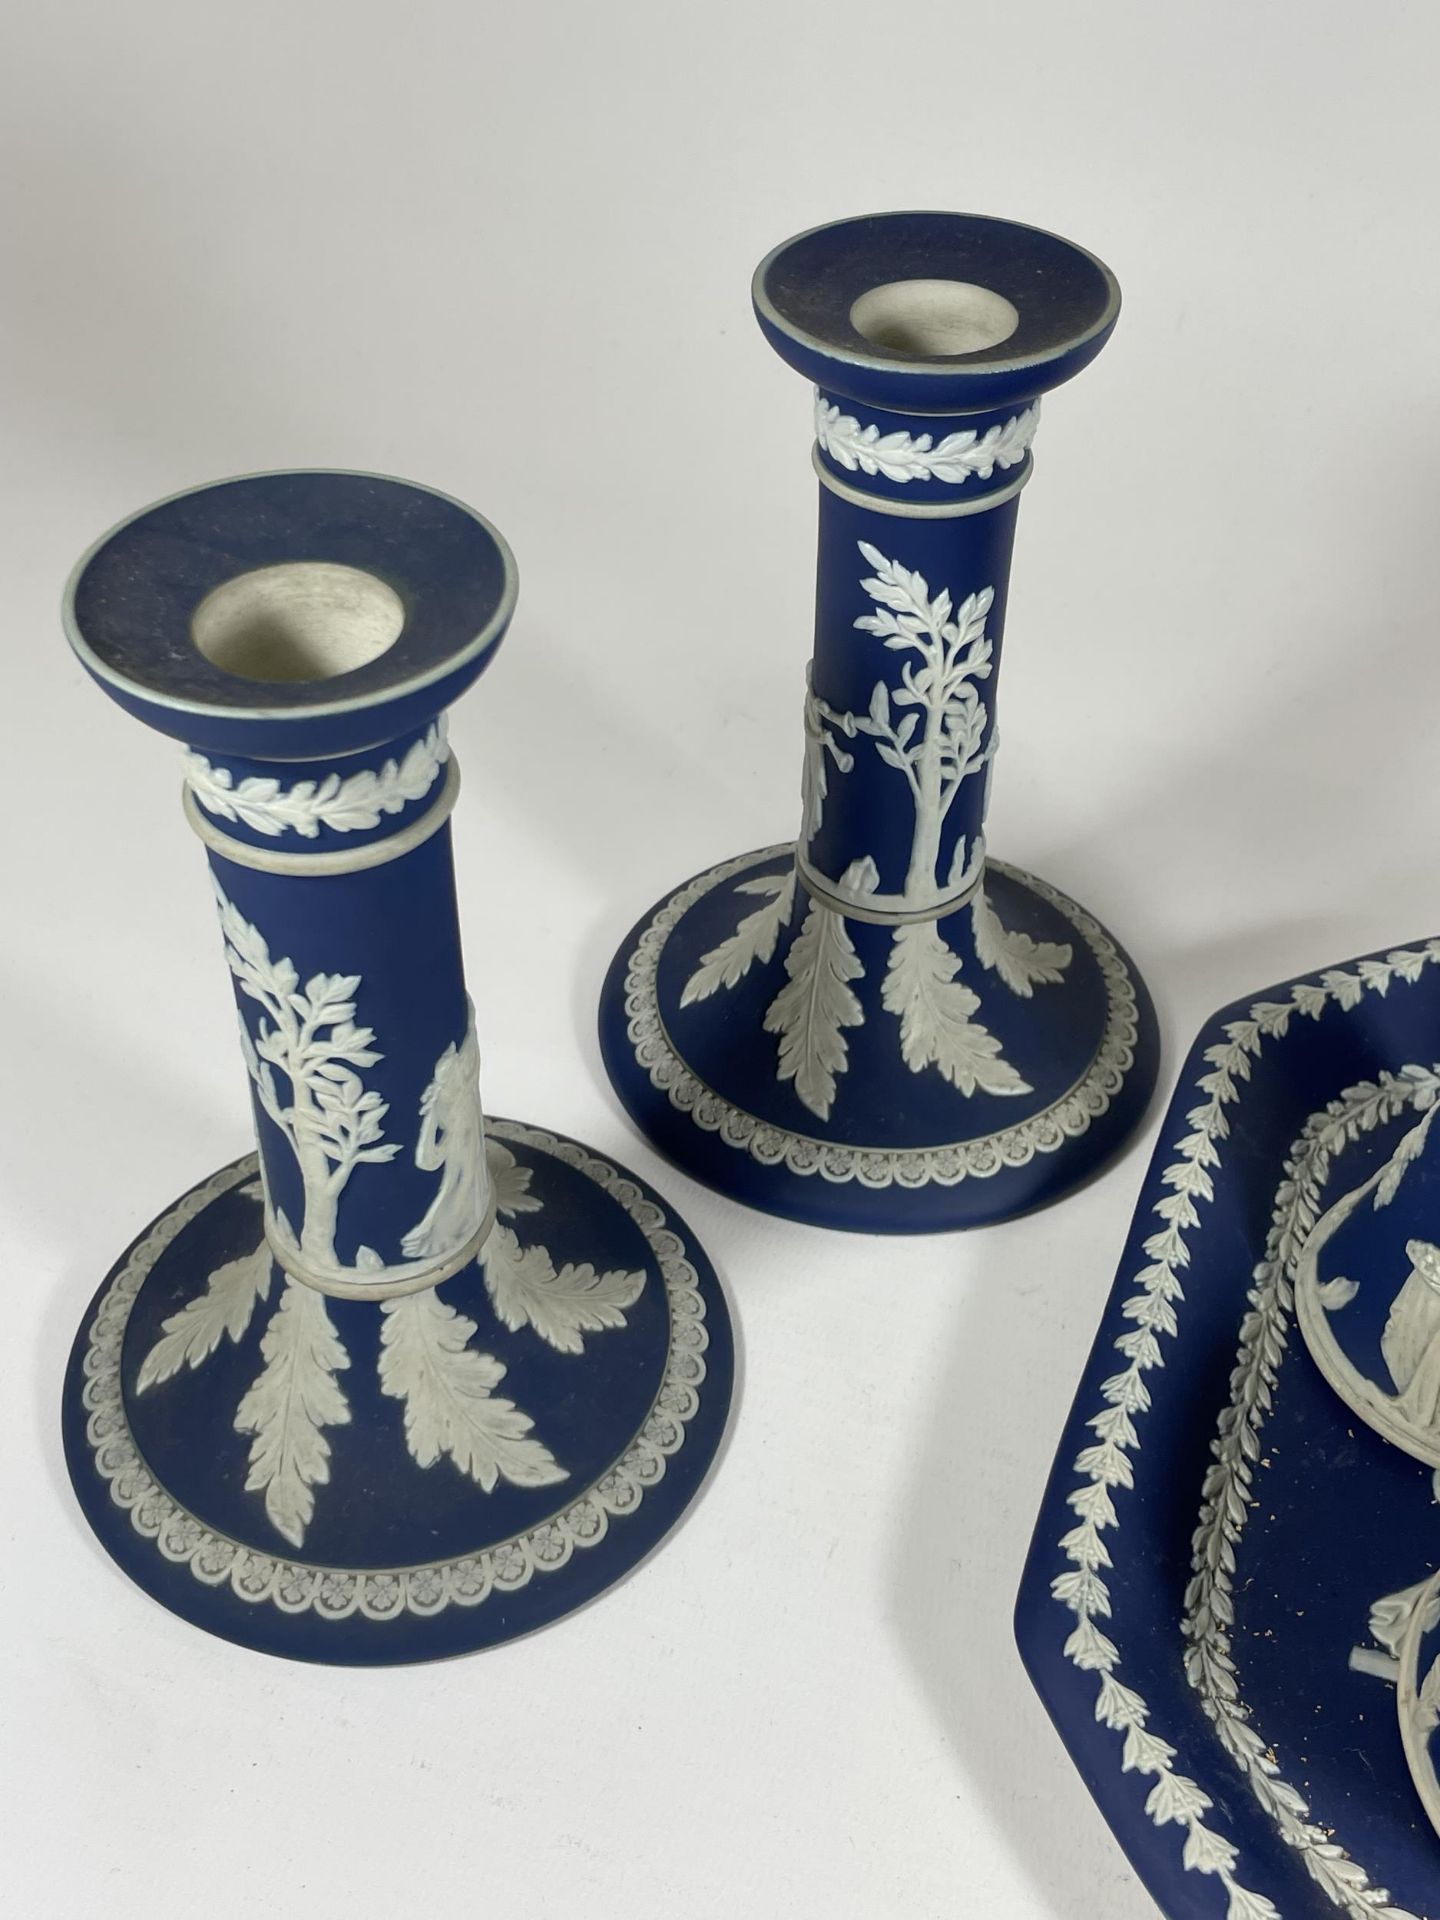 AN ADAMS JASPERWARE POTTERY DRESSING TABLE SET WITH A PAIR OF CANDLESTICKS - Image 2 of 3